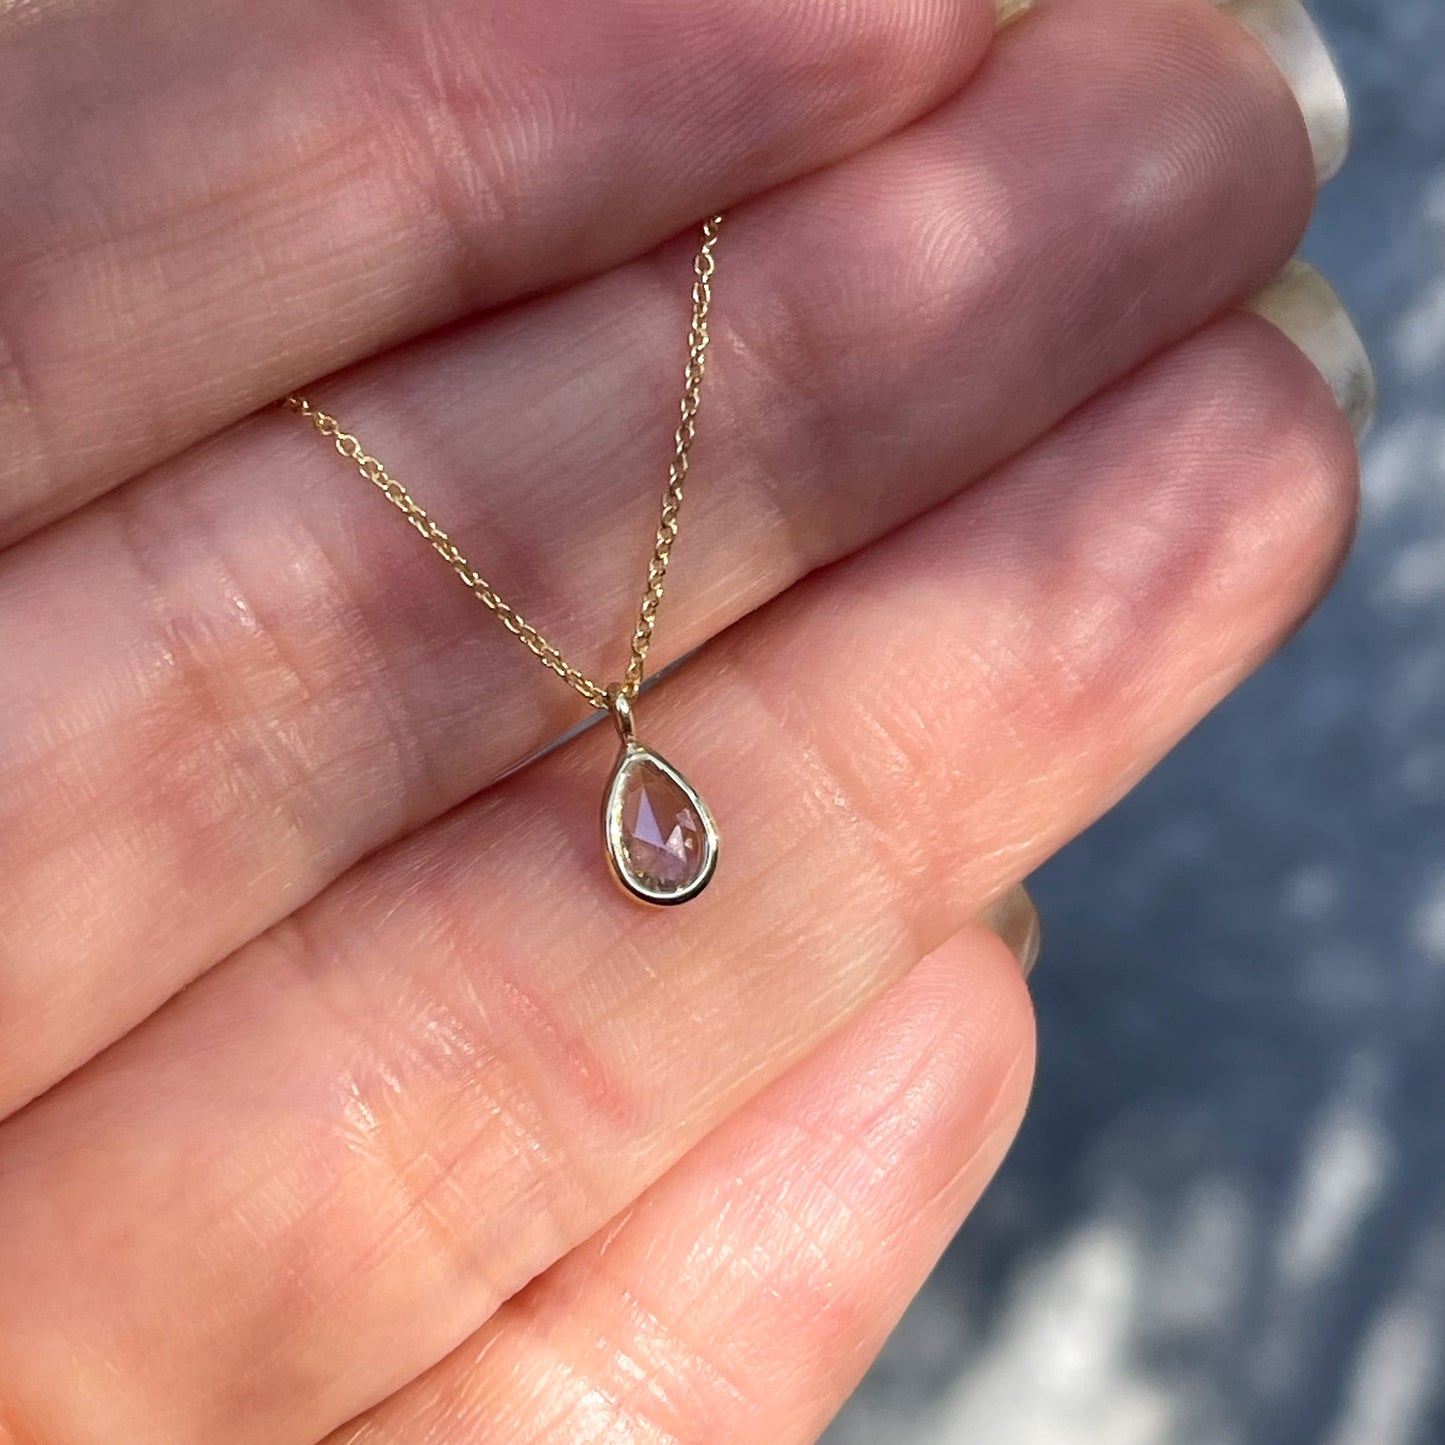 A Dainty Diamond Necklace by NIXIN Jewelry with a diamond charm on a delicate gold chain.